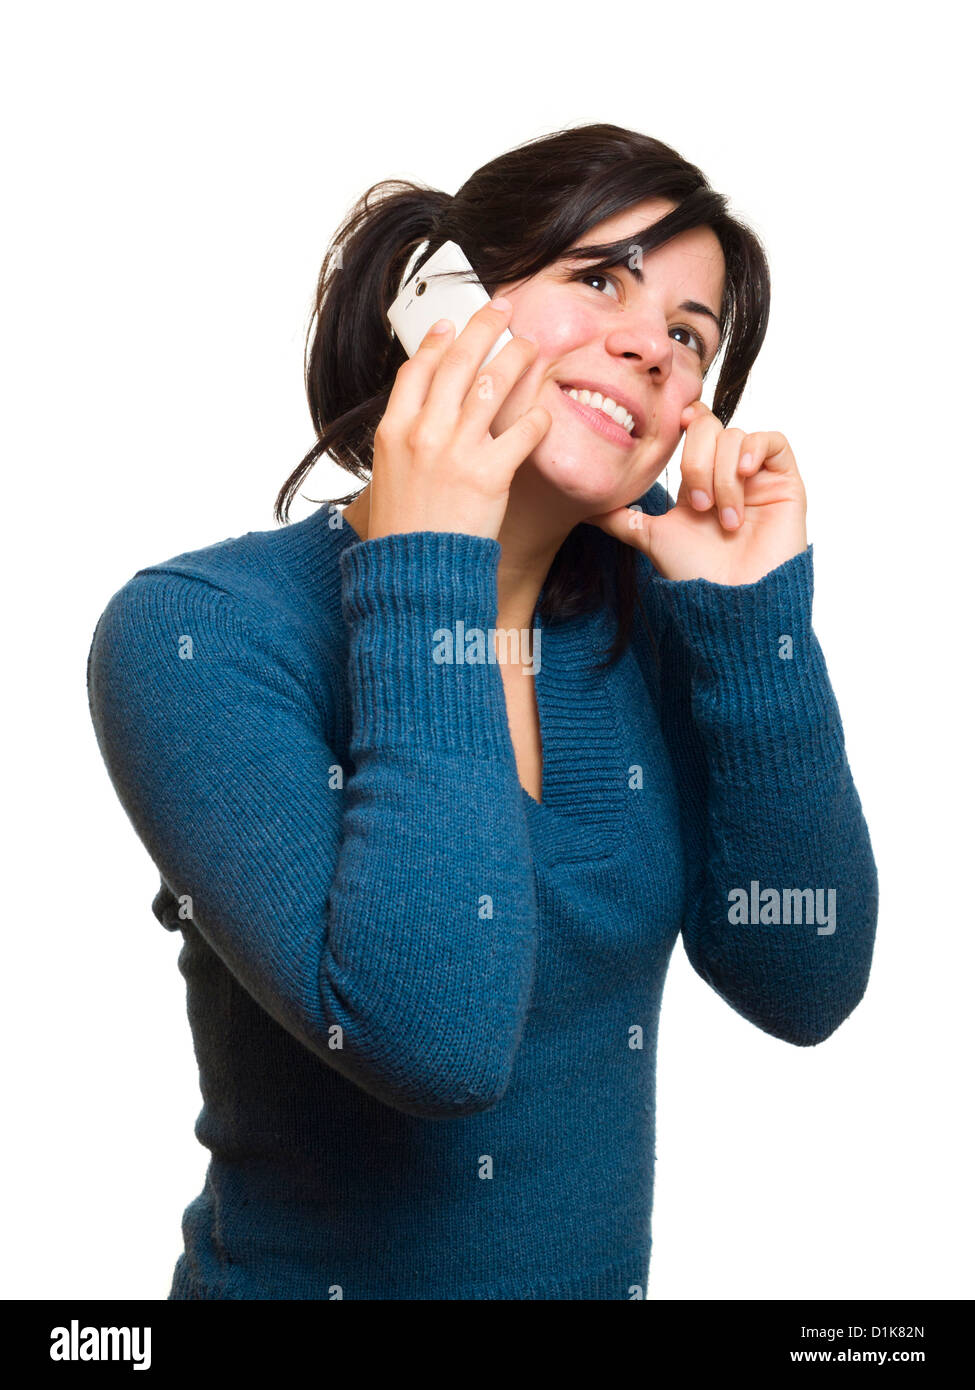 Young woman talking on mobile phone Stock Photo